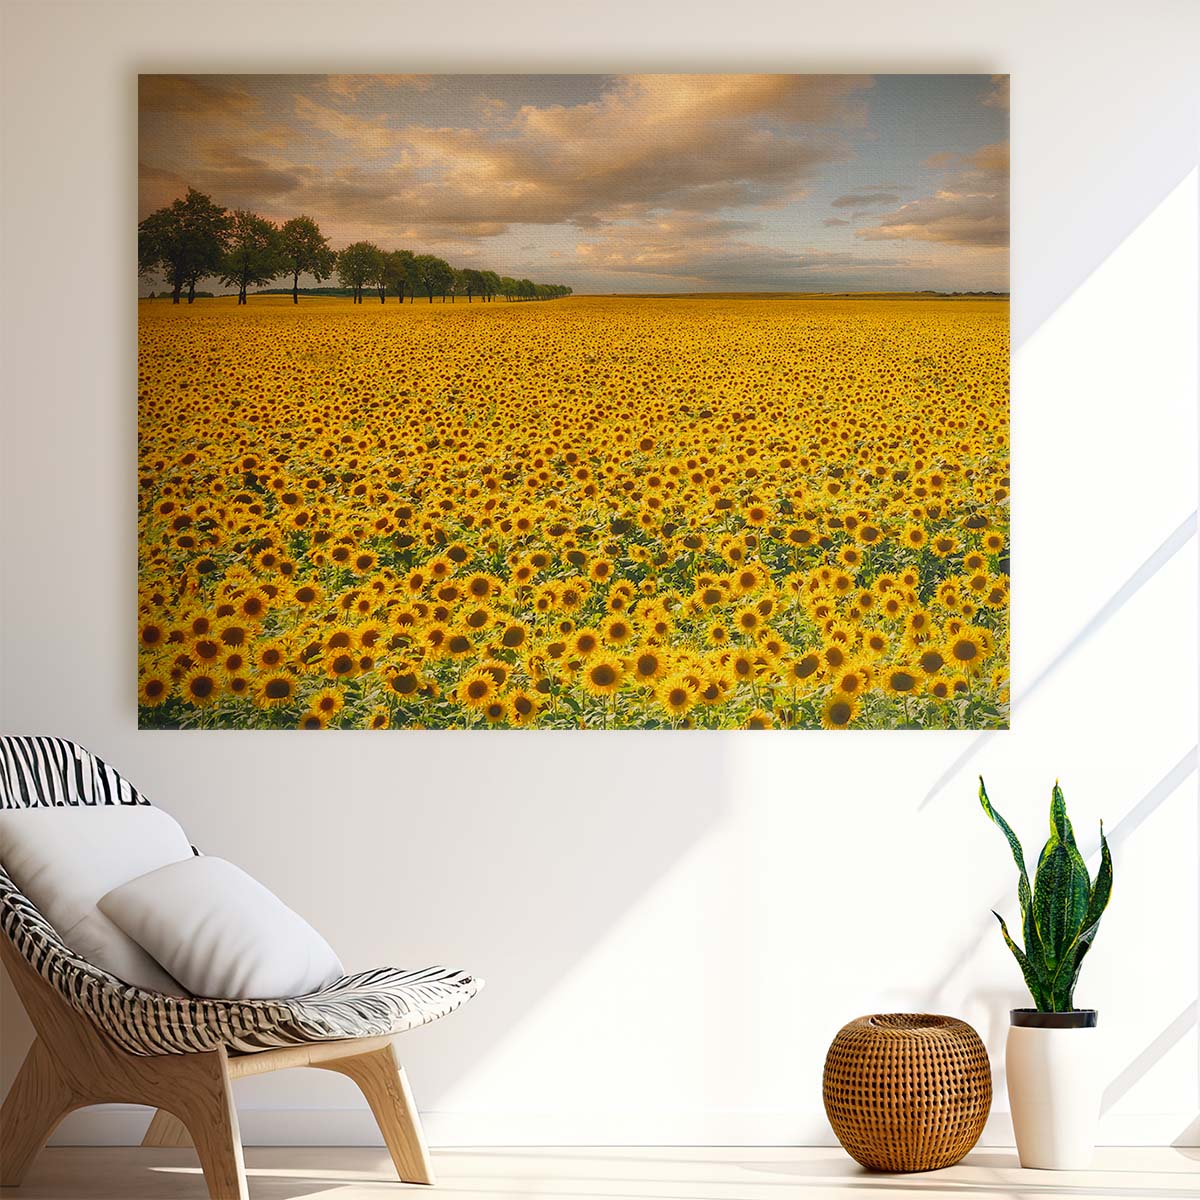 Sunflower Meadow Sunset Polish Countryside Wall Art by Luxuriance Designs. Made in USA.